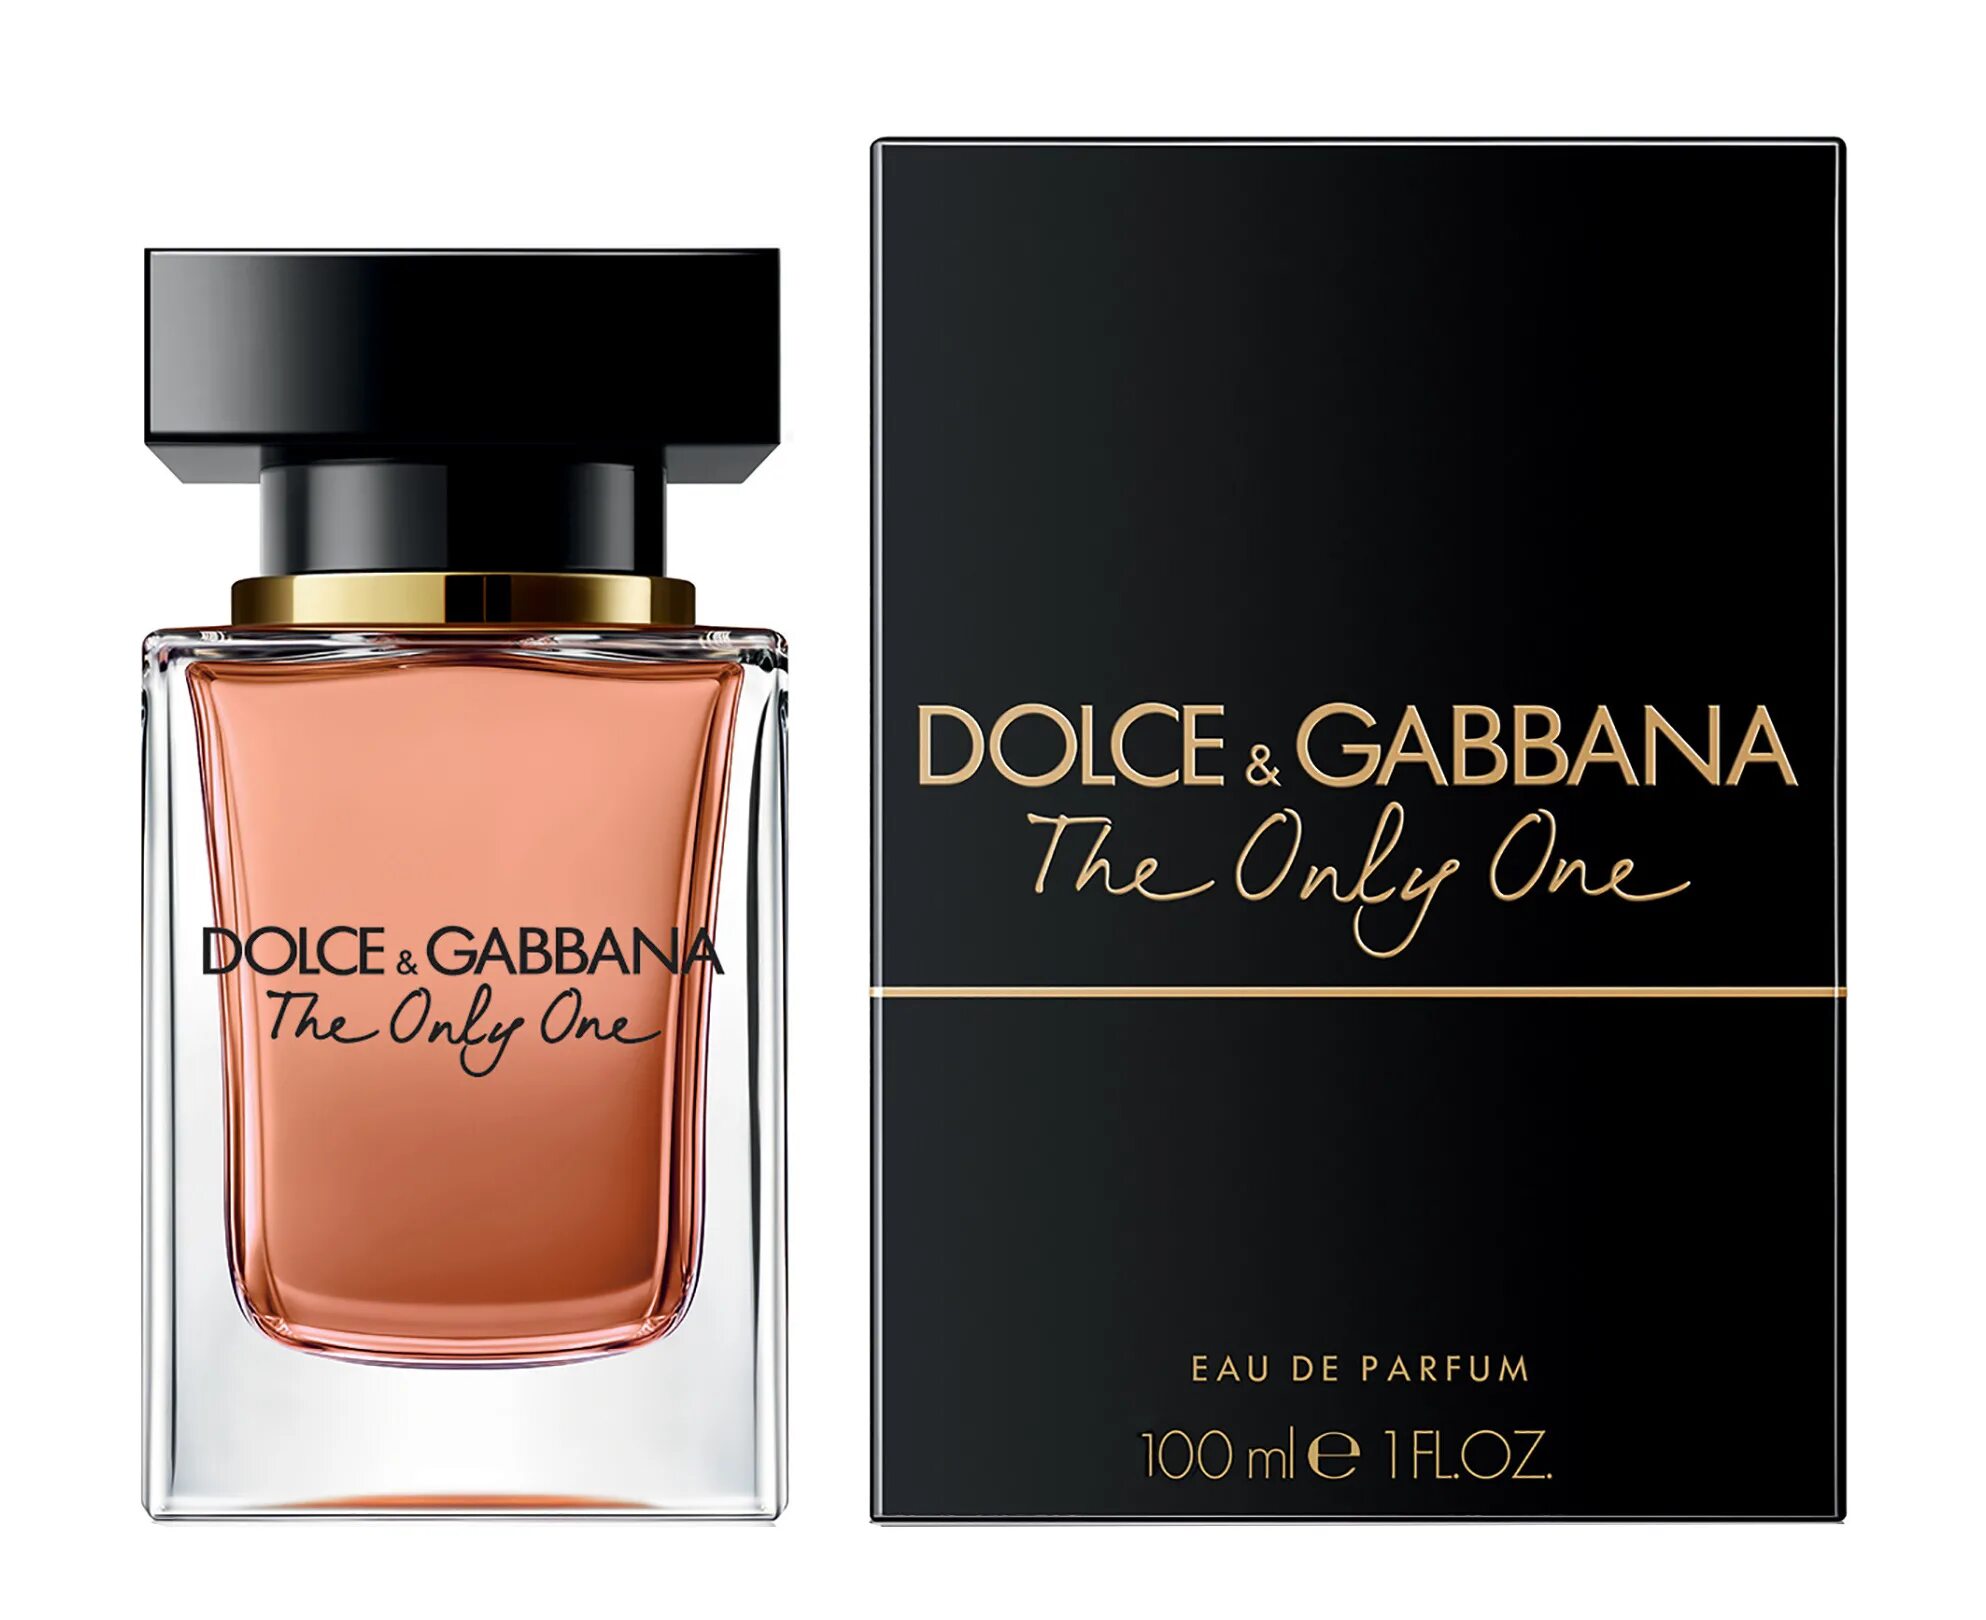 Dolce & Gabbana the only one, EDP., 100 ml. Dolce & Gabbana the only one EDP 50 ml. Dolce Gabbana the only one 100ml. Dolce Gabbana the only one 50ml.